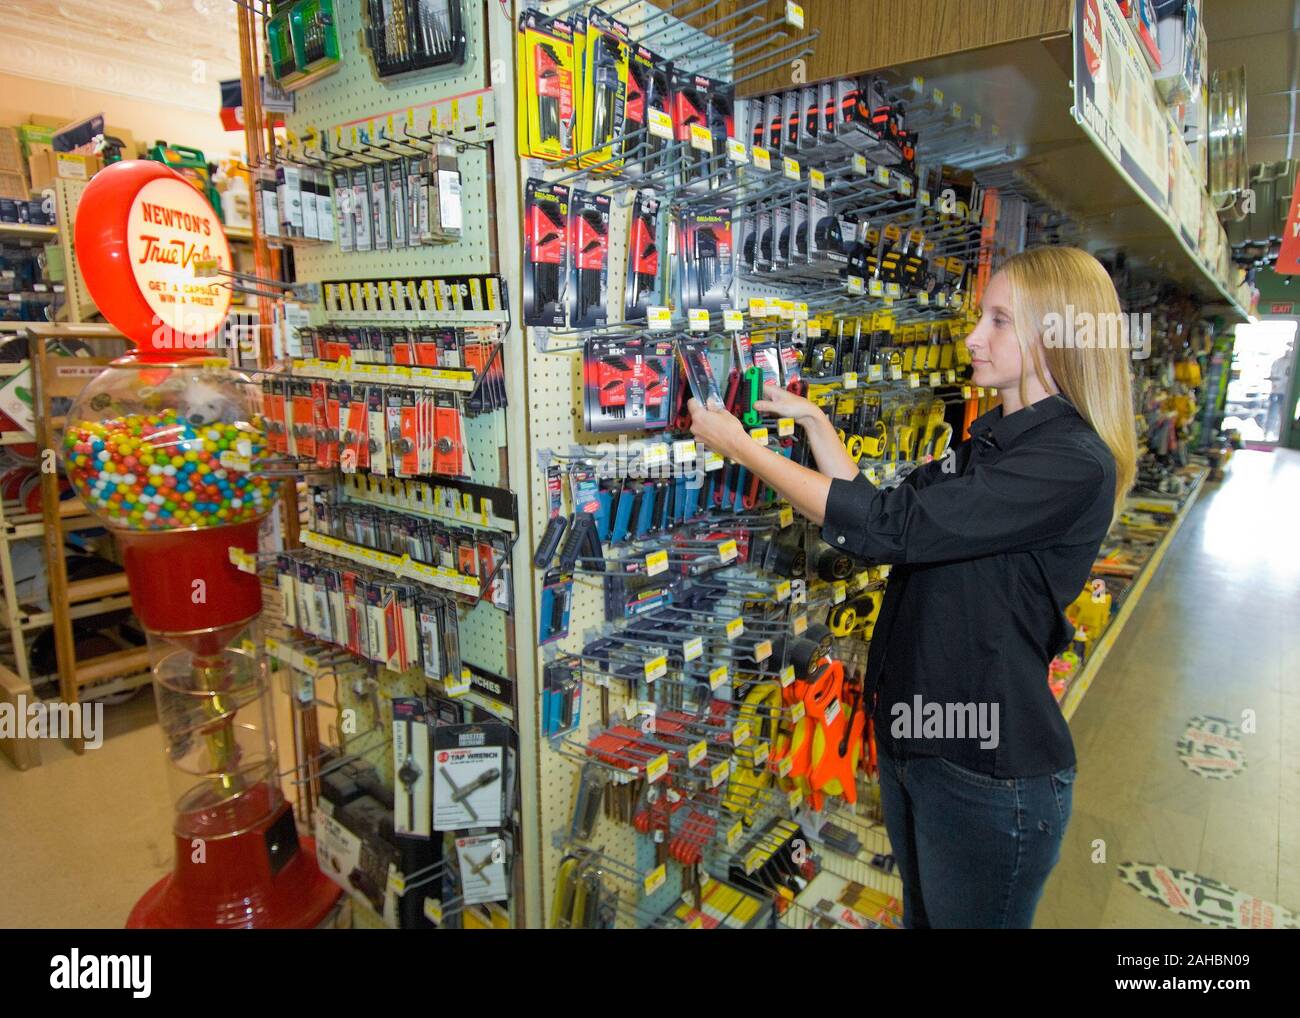 Megan Mentzer arranges tools on a rack in Newton’s Tru-Value Hardware Store in Cherryvale, Kansas. Mentzer is a fourth generation owner of the hardware store and the President of the Cherryvale Chamber of Commerce. Mentzer was able to acquire a Rural Business Economic Grant from the U. S. Department of Agriculture, Rural Development, Rural Business with funds allocated through the American Recovery and Reinvestment Act of 2009 (ARRA). 09di1526-08 Stock Photo